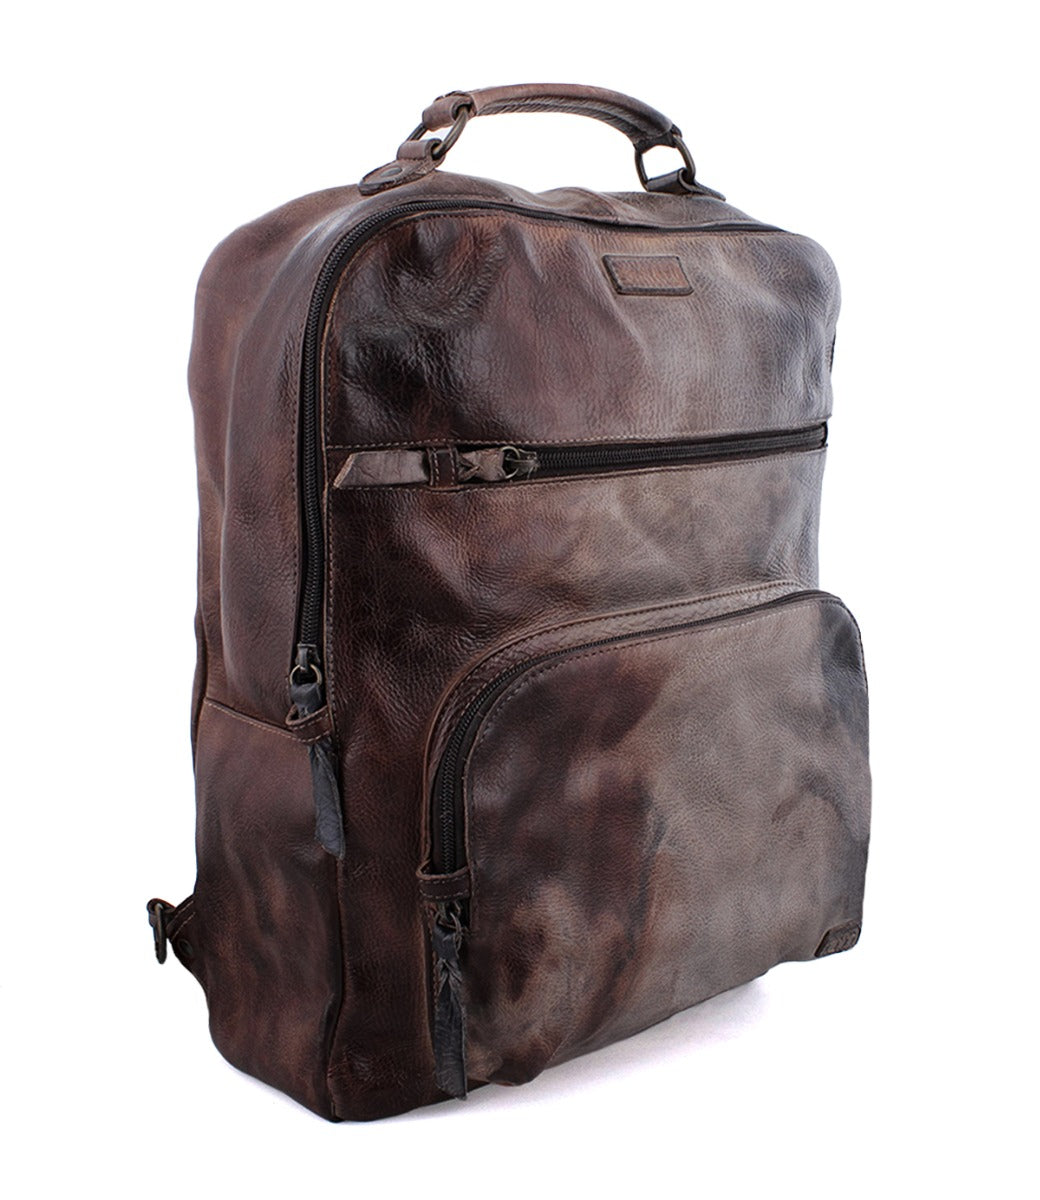 A Lafe brown leather backpack on a white background by Bed Stu.